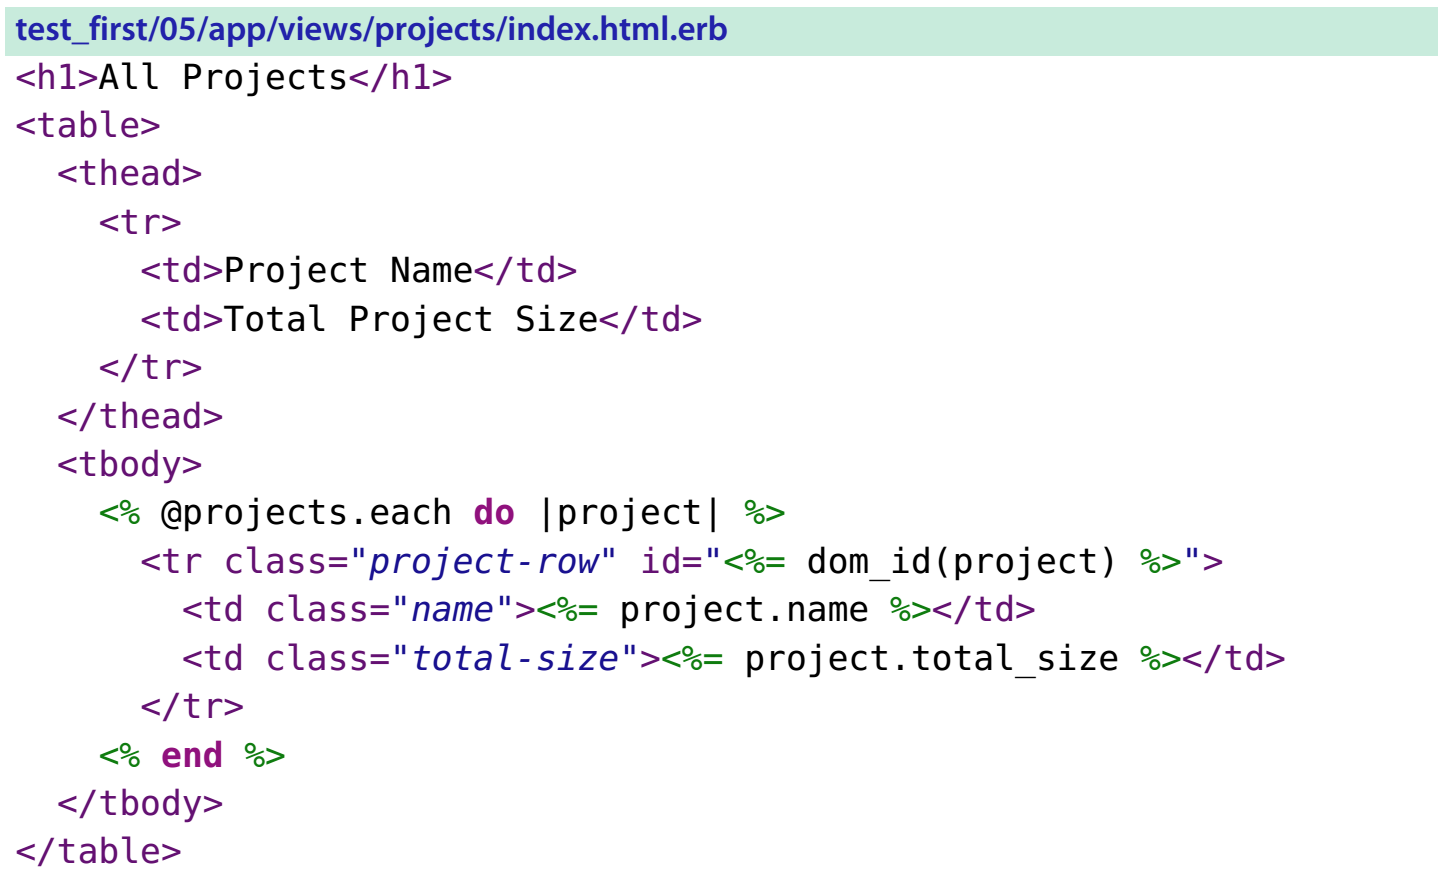 Project Class